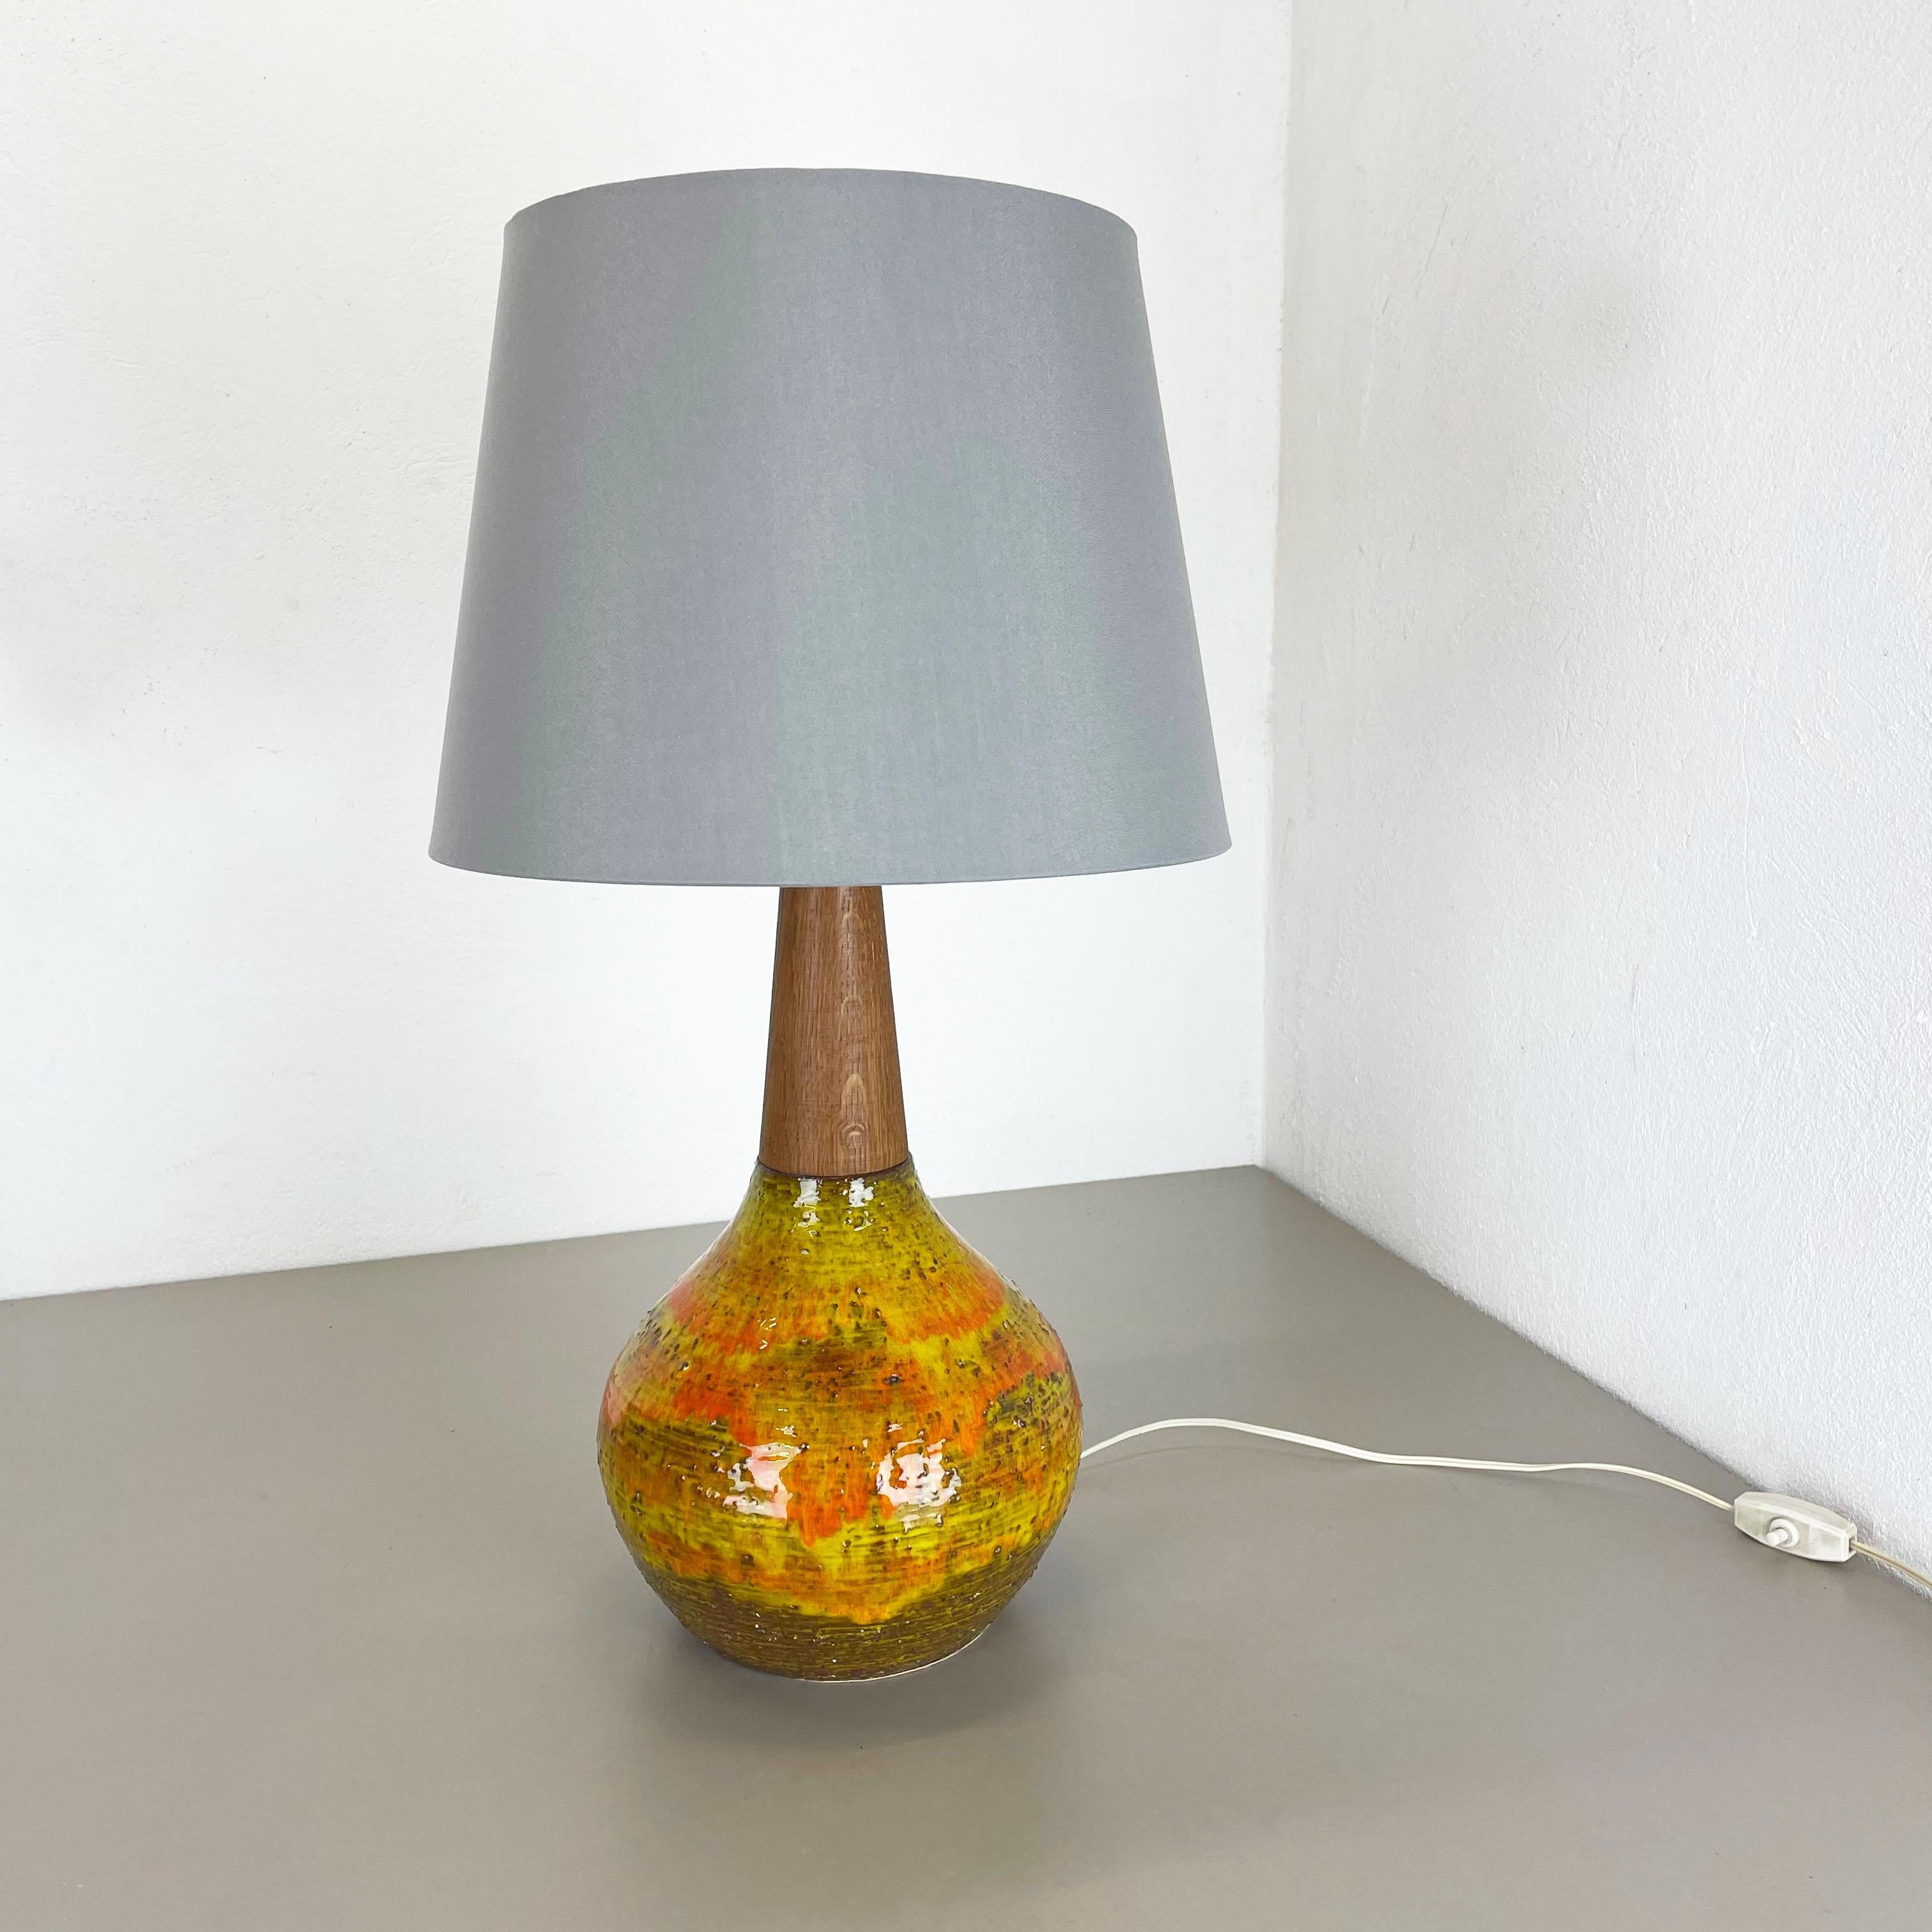 Article:

Fat lava table light base


Producer:

Krösselbach Ceramics, Germany


Decade:

1970s




This original vintage light base was produced in the 1970s by Krösselbach Ceramics in Germany. It is made of ceramic pottery in fat